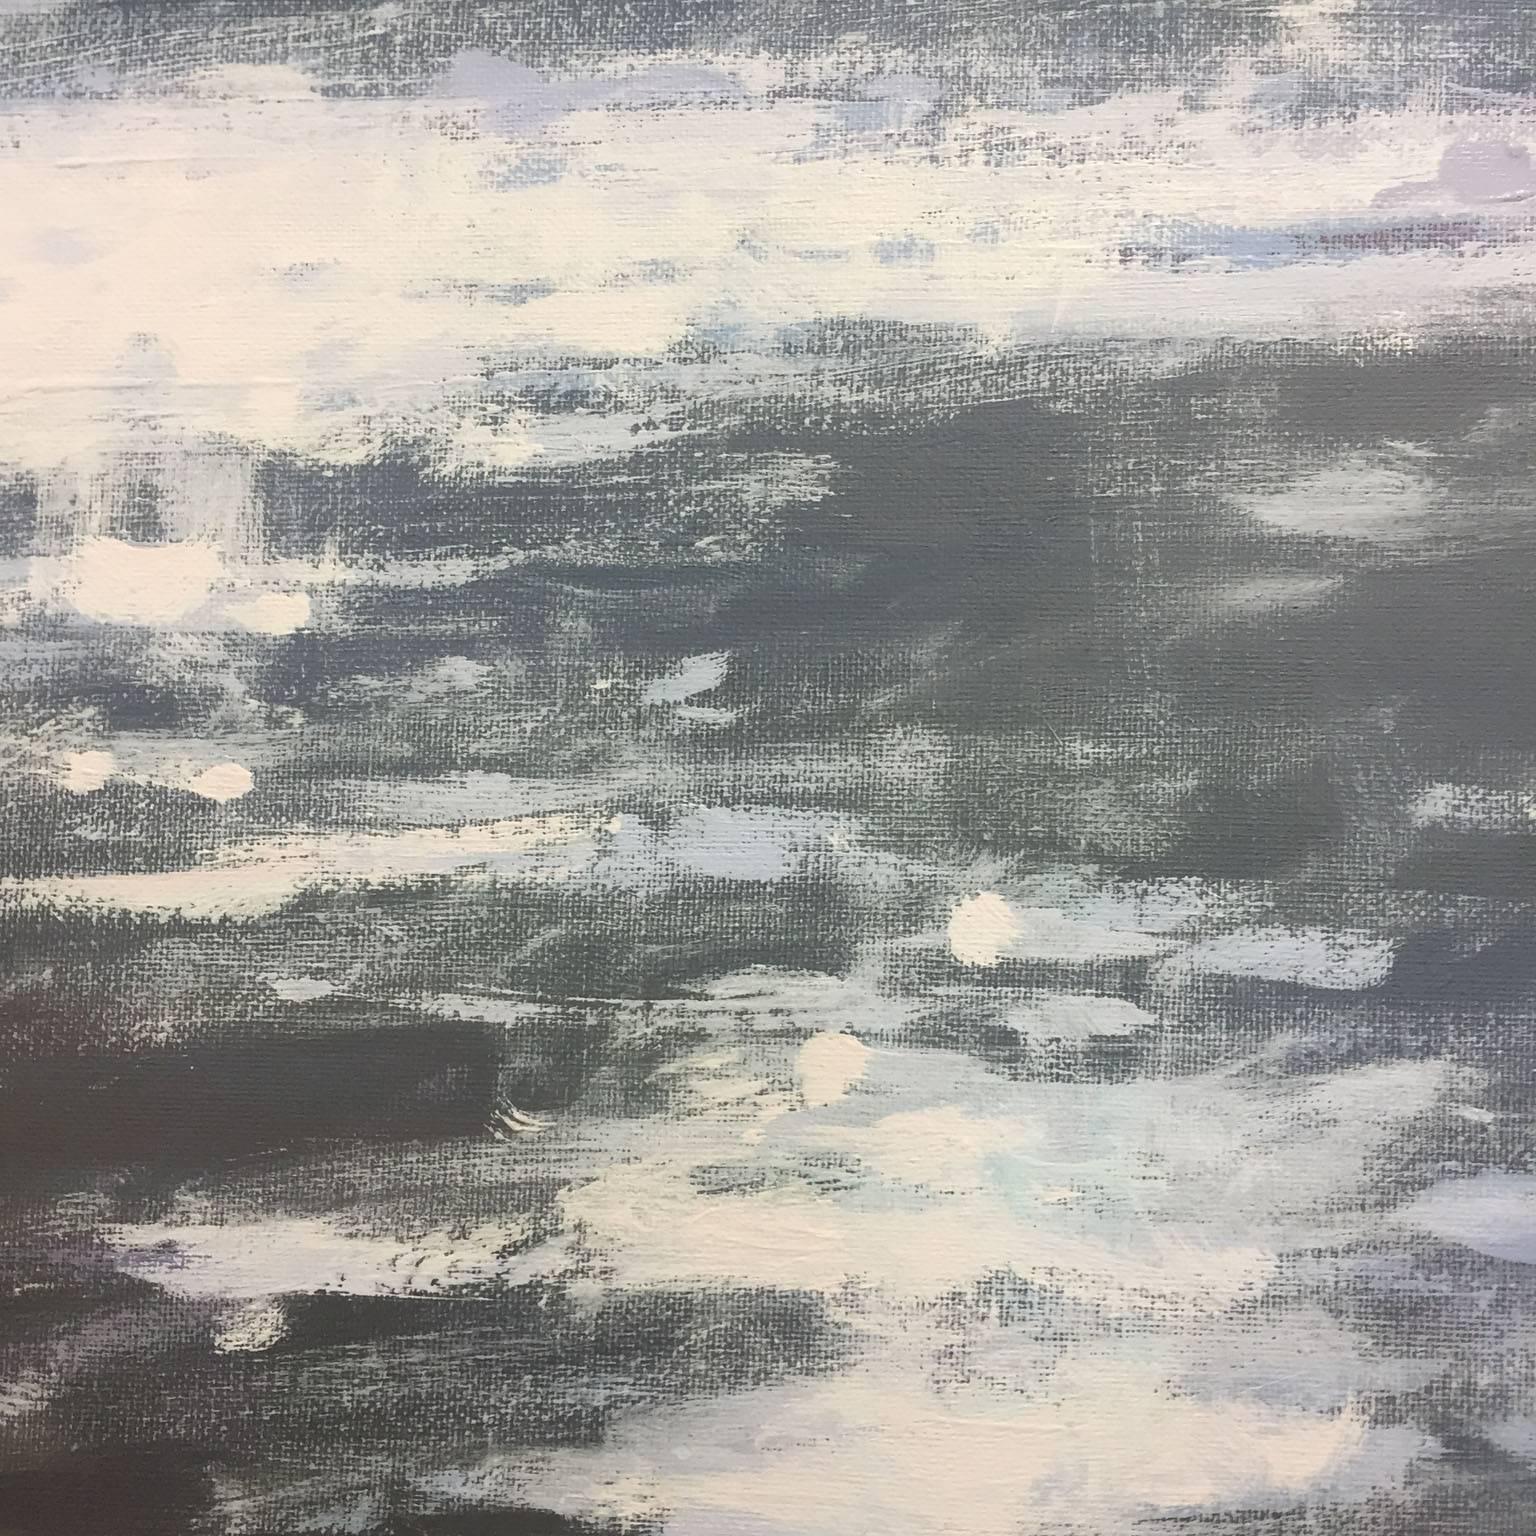 Jenny Aitken's beautiful painting called 'Light on the Derwent' is an original acrylic painting on canvas. This work art is sold unframed but ready to hang.

 